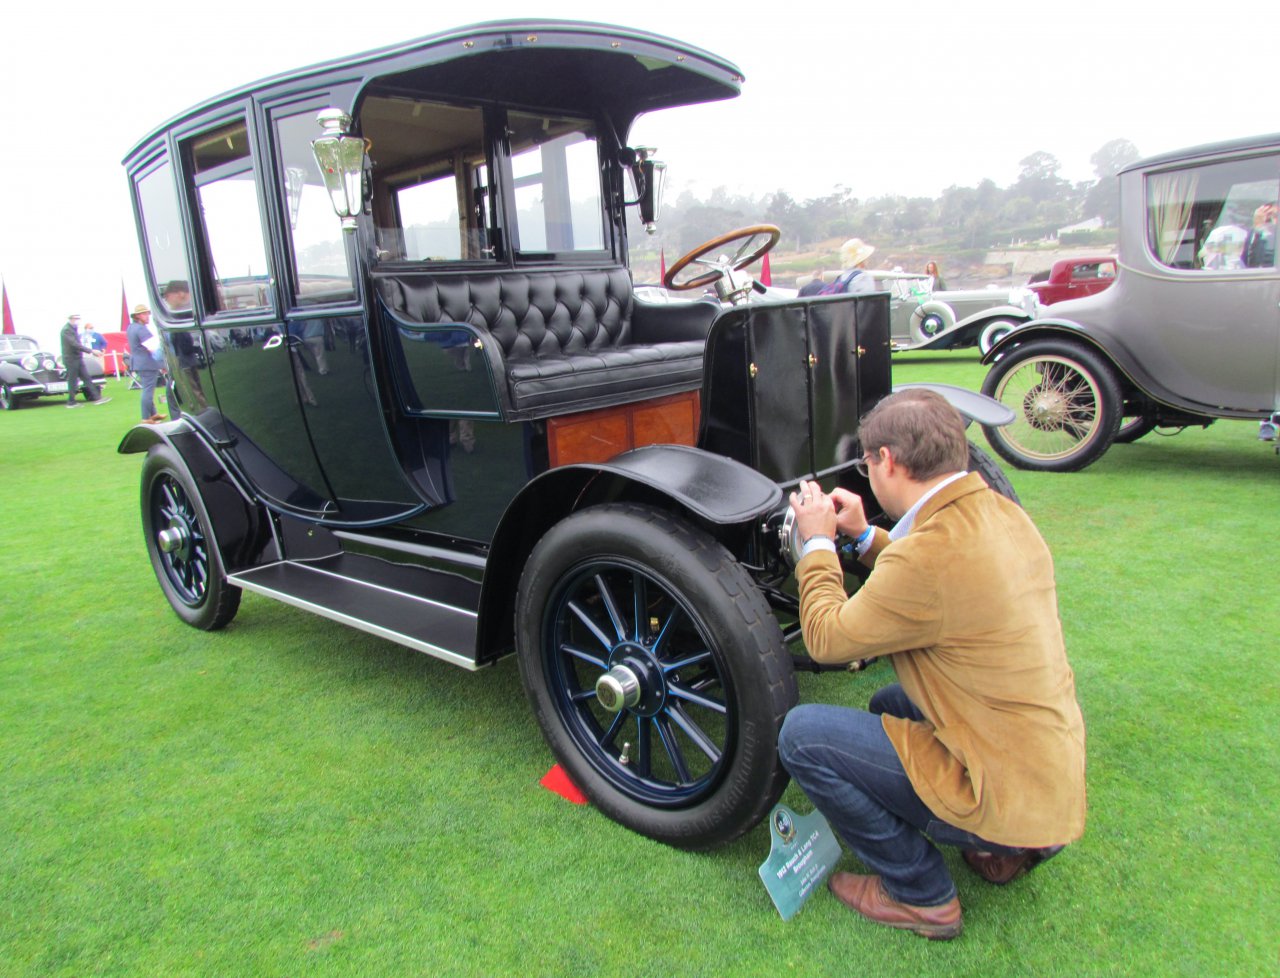 electric vehicles, Pebble Beach takes a look back at early electric vehicles, ClassicCars.com Journal